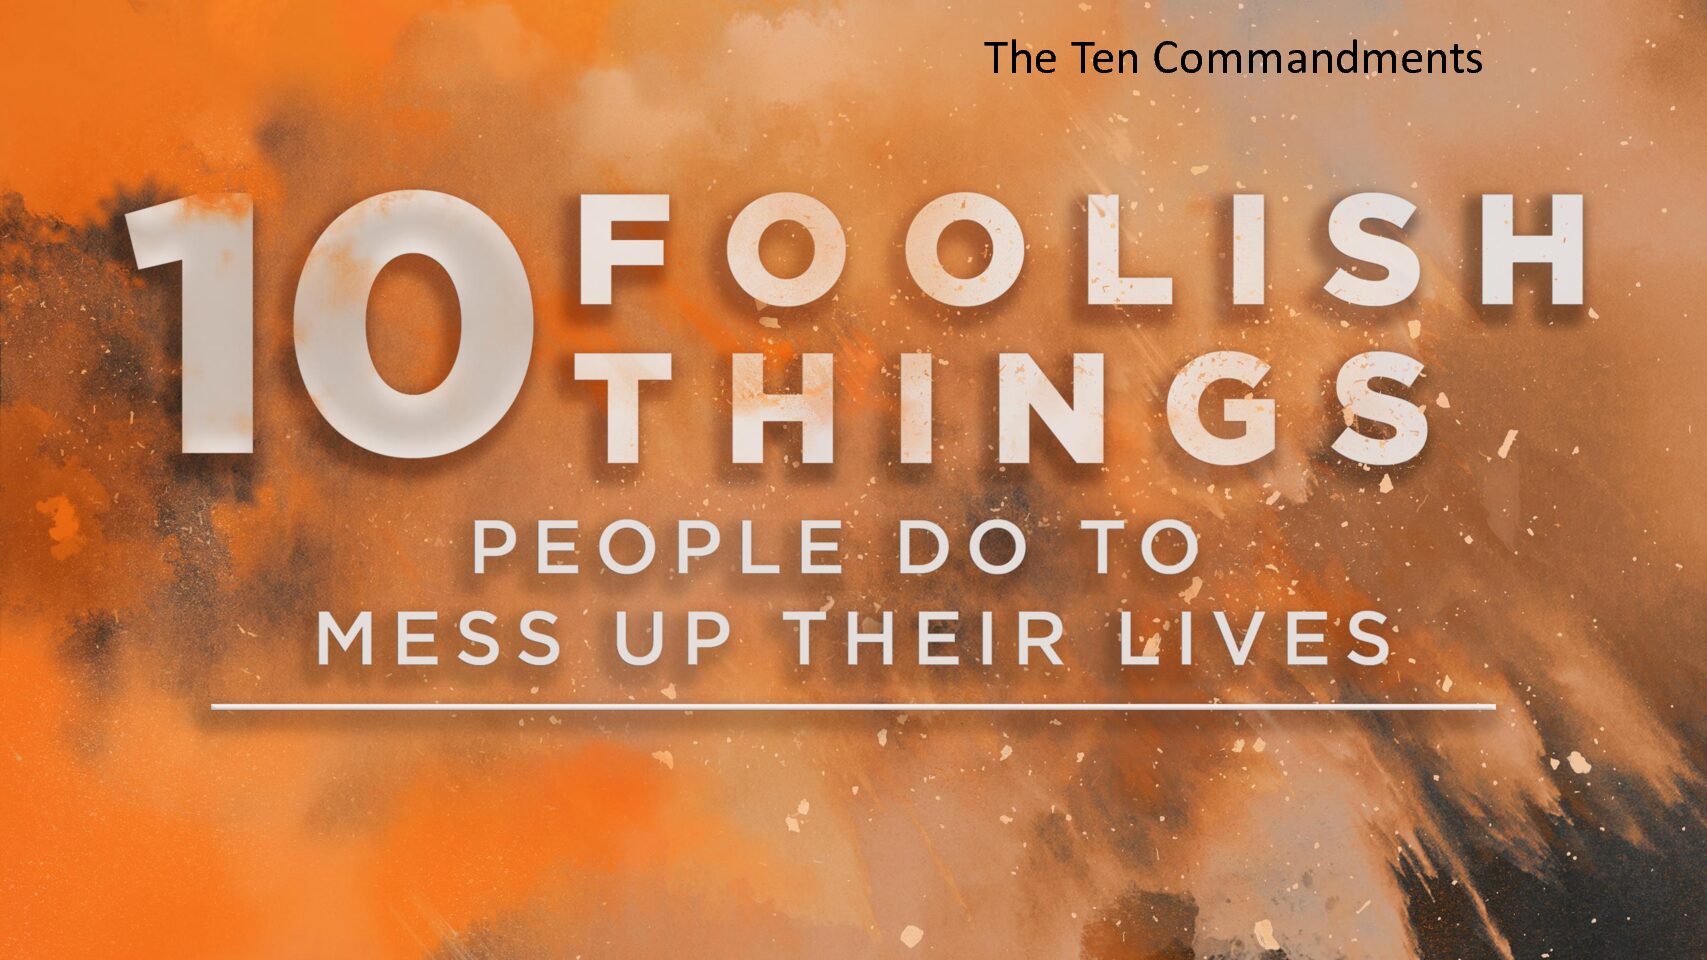 10 Foolish Things People Do to Mess Up Their Lives